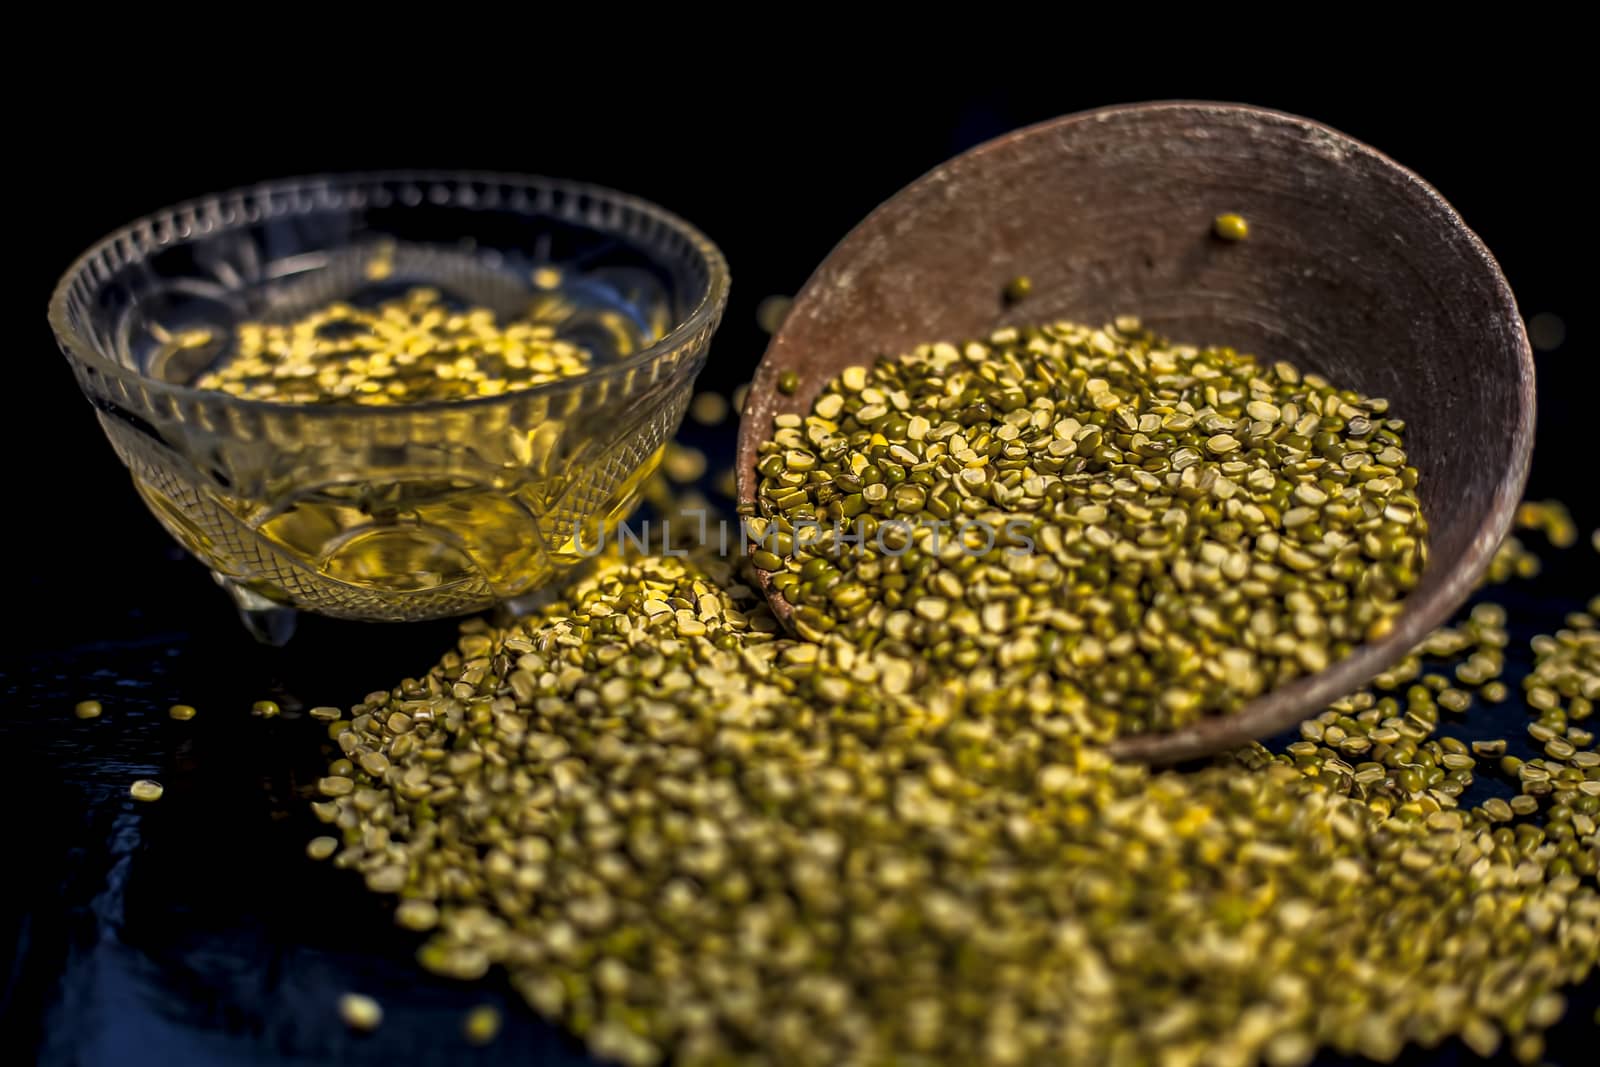 Close shot of mung bean or moong dal in a clay bowl along with some water and moong dal well mixed on a black glossy surface. Horizontal shot with Rembrandt lighting technique.